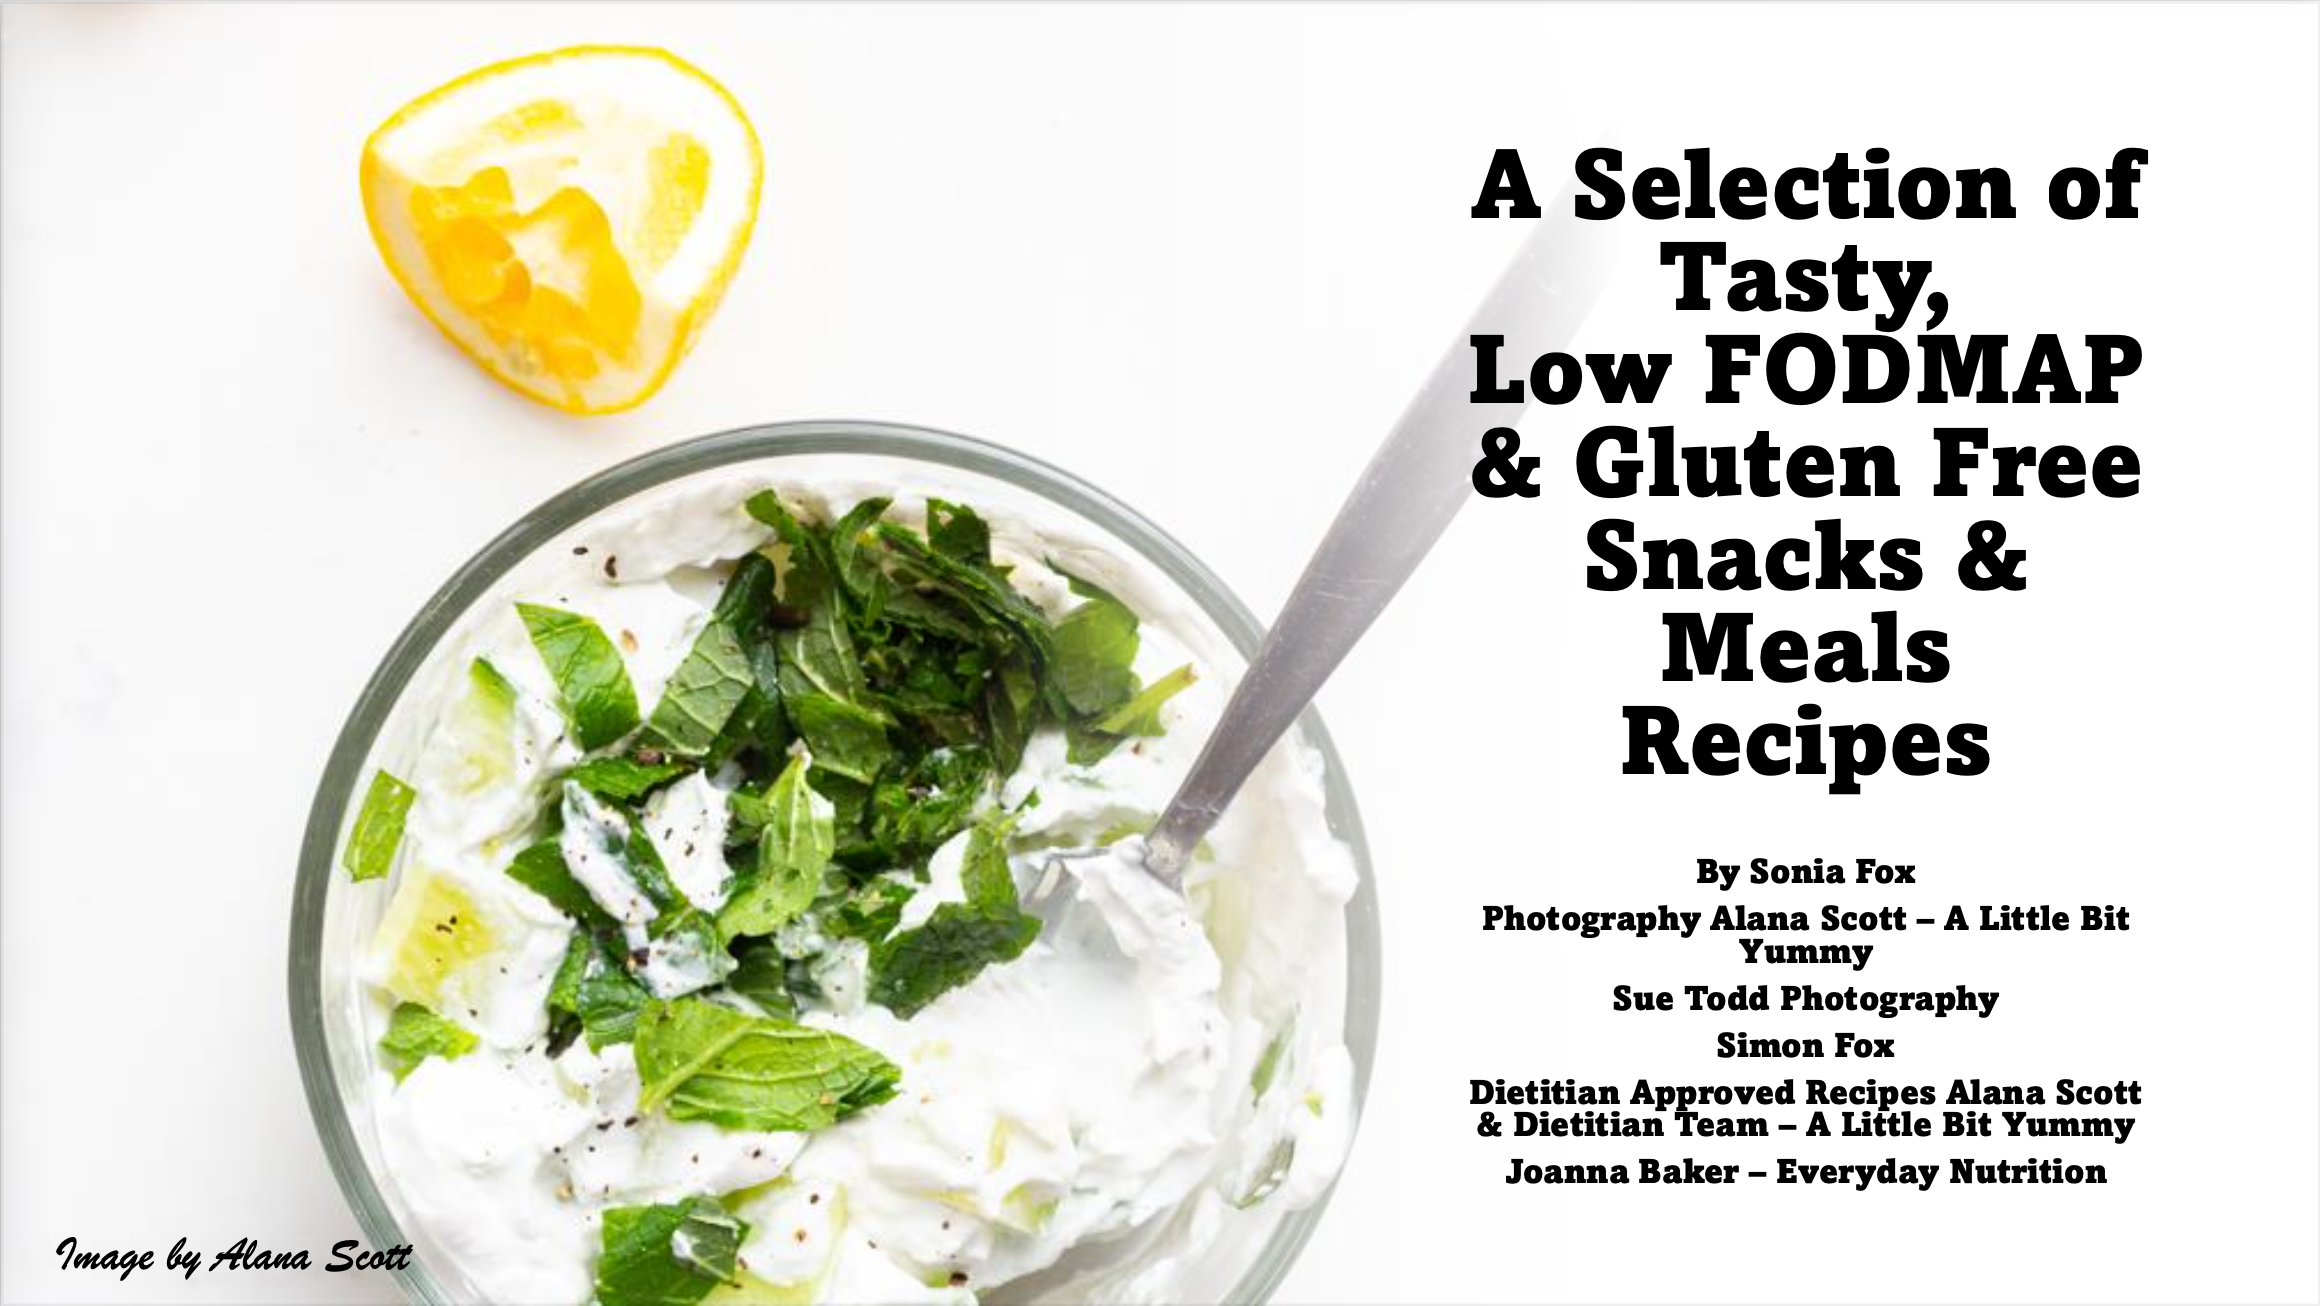 The inside cover of the Slightly Different free recipe ebook